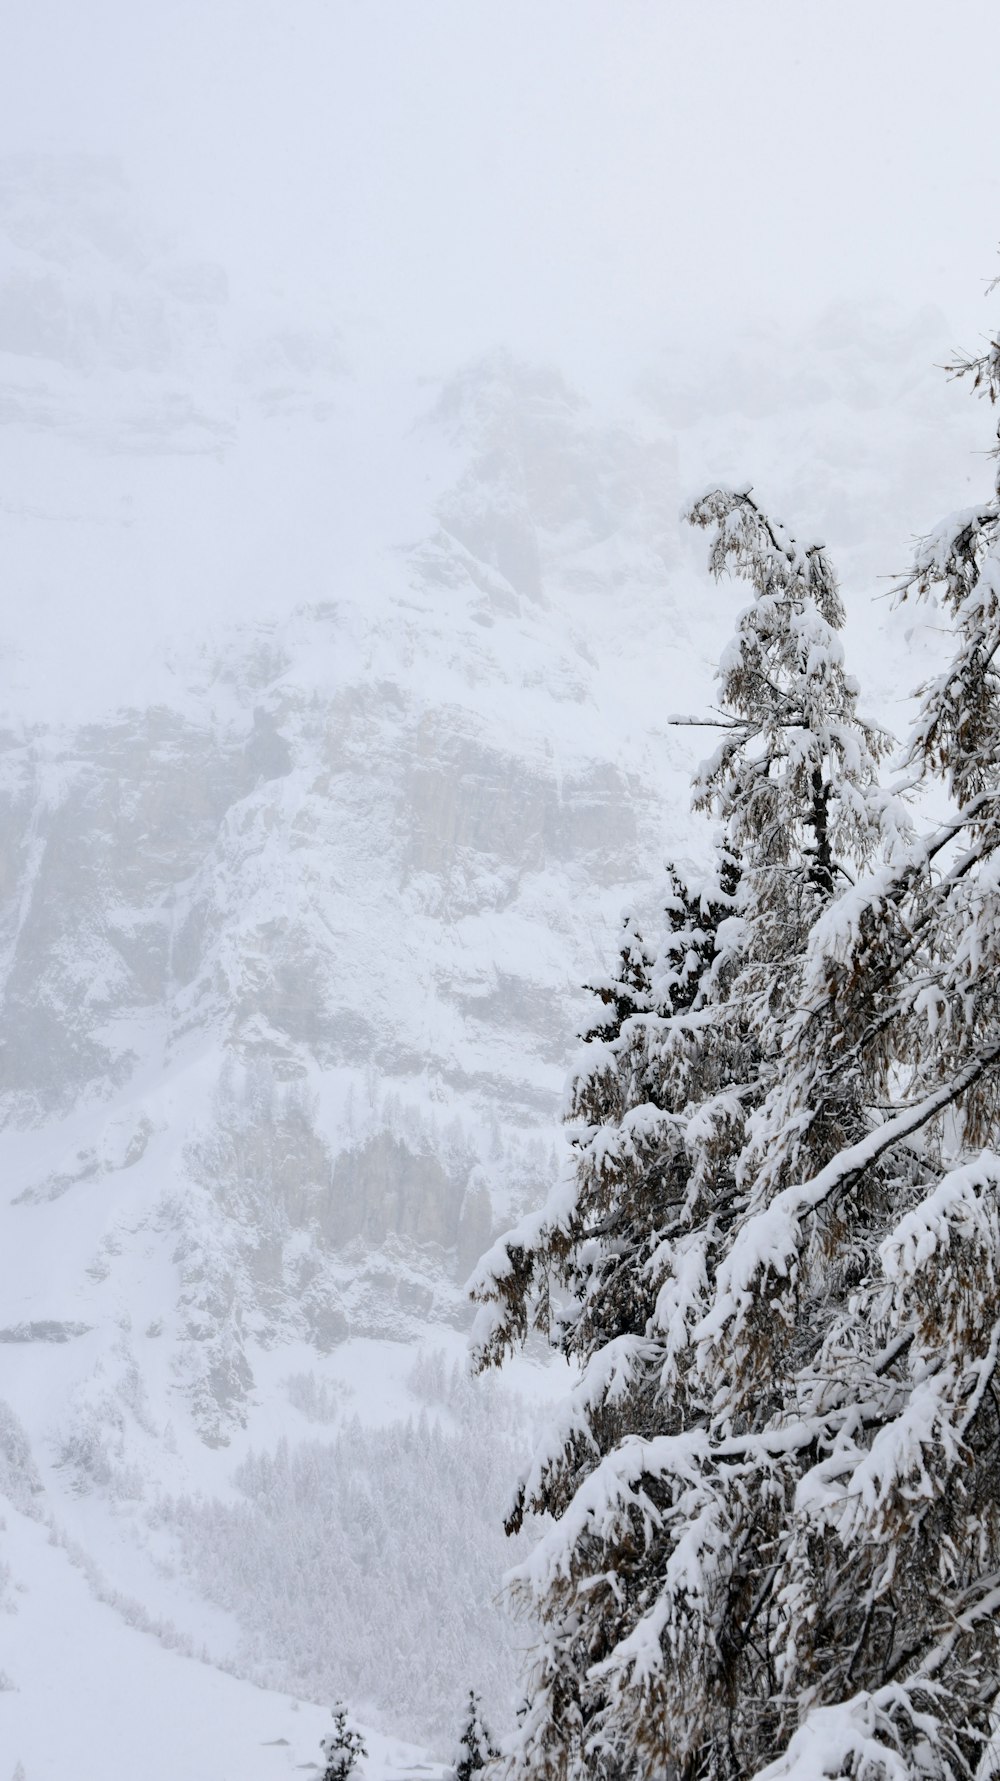 a person is skiing down a snowy mountain